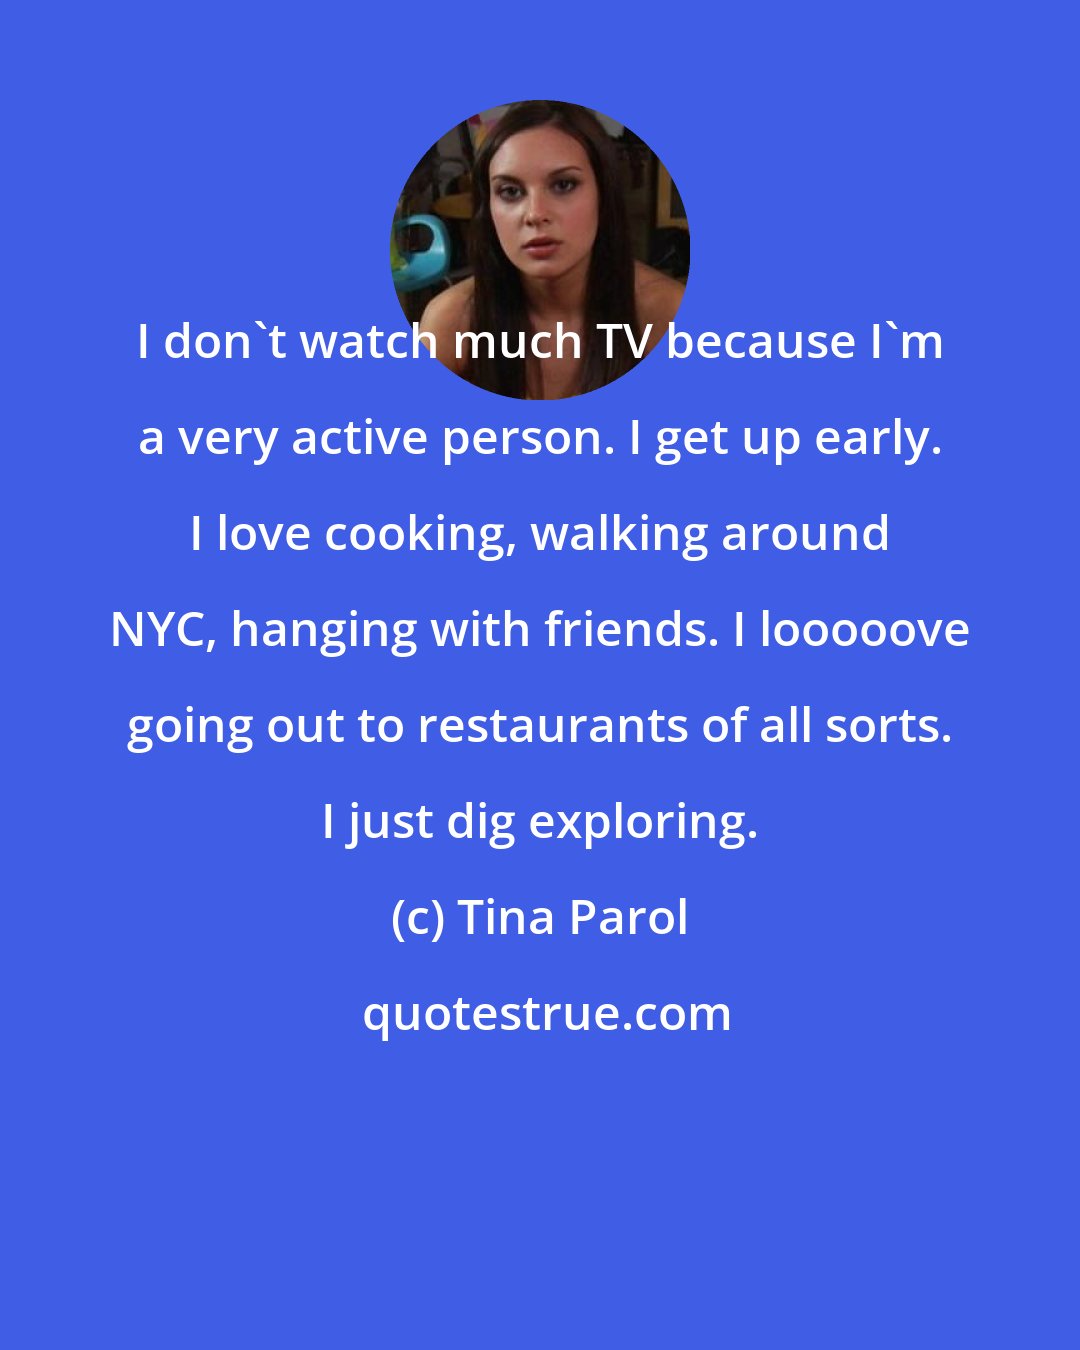 Tina Parol: I don't watch much TV because I'm a very active person. I get up early. I love cooking, walking around NYC, hanging with friends. I looooove going out to restaurants of all sorts. I just dig exploring.